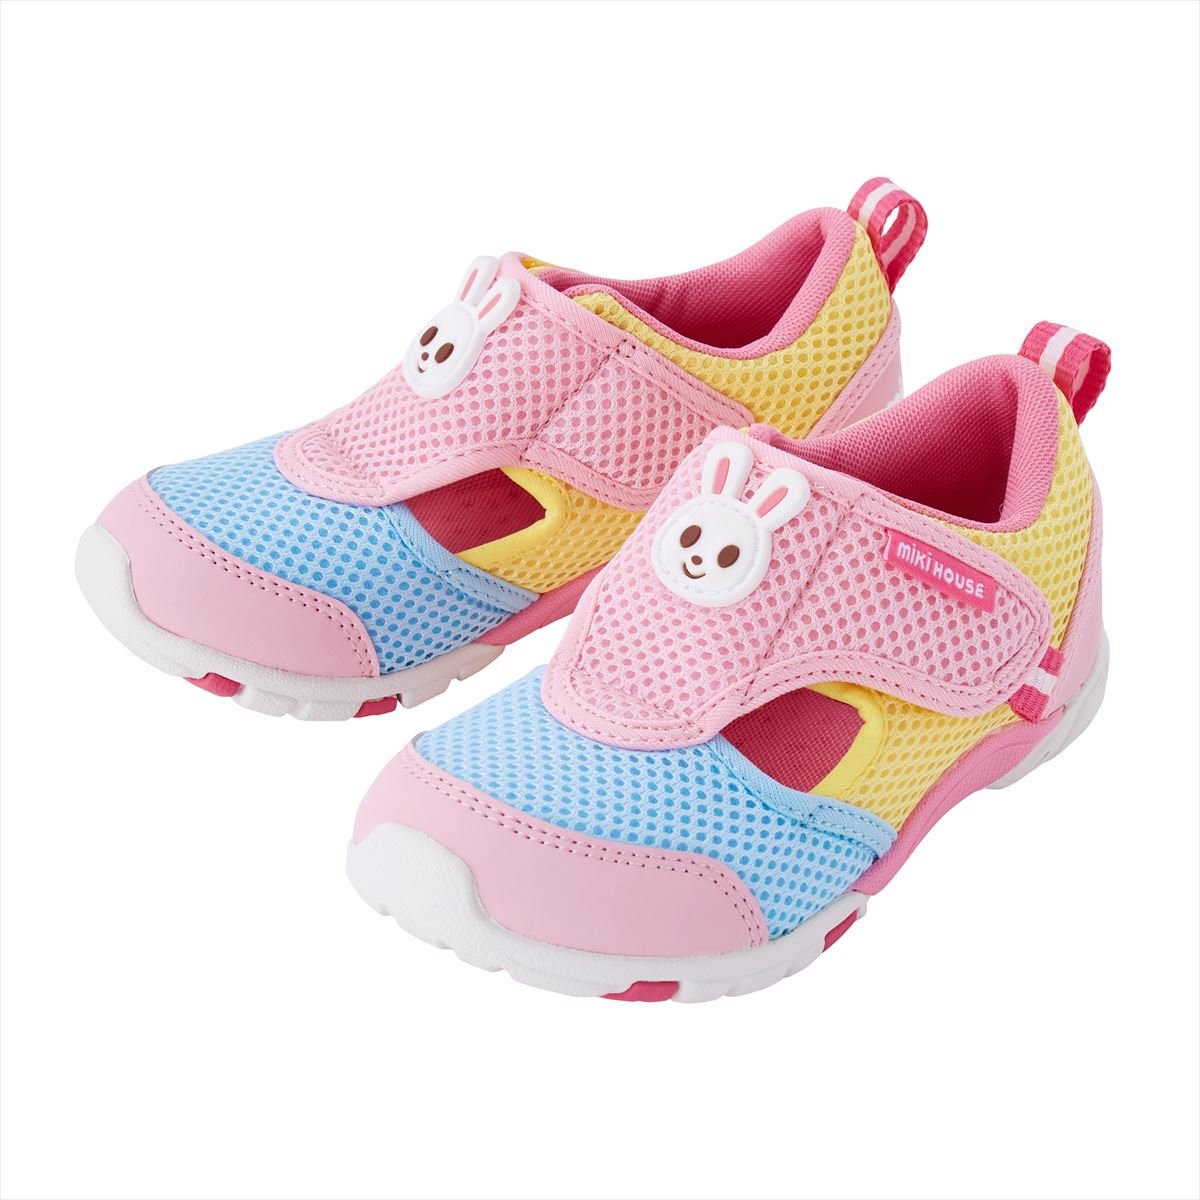 Double Russell Sneakers for Kids - Pretty Pastel - MIKI HOUSE USA